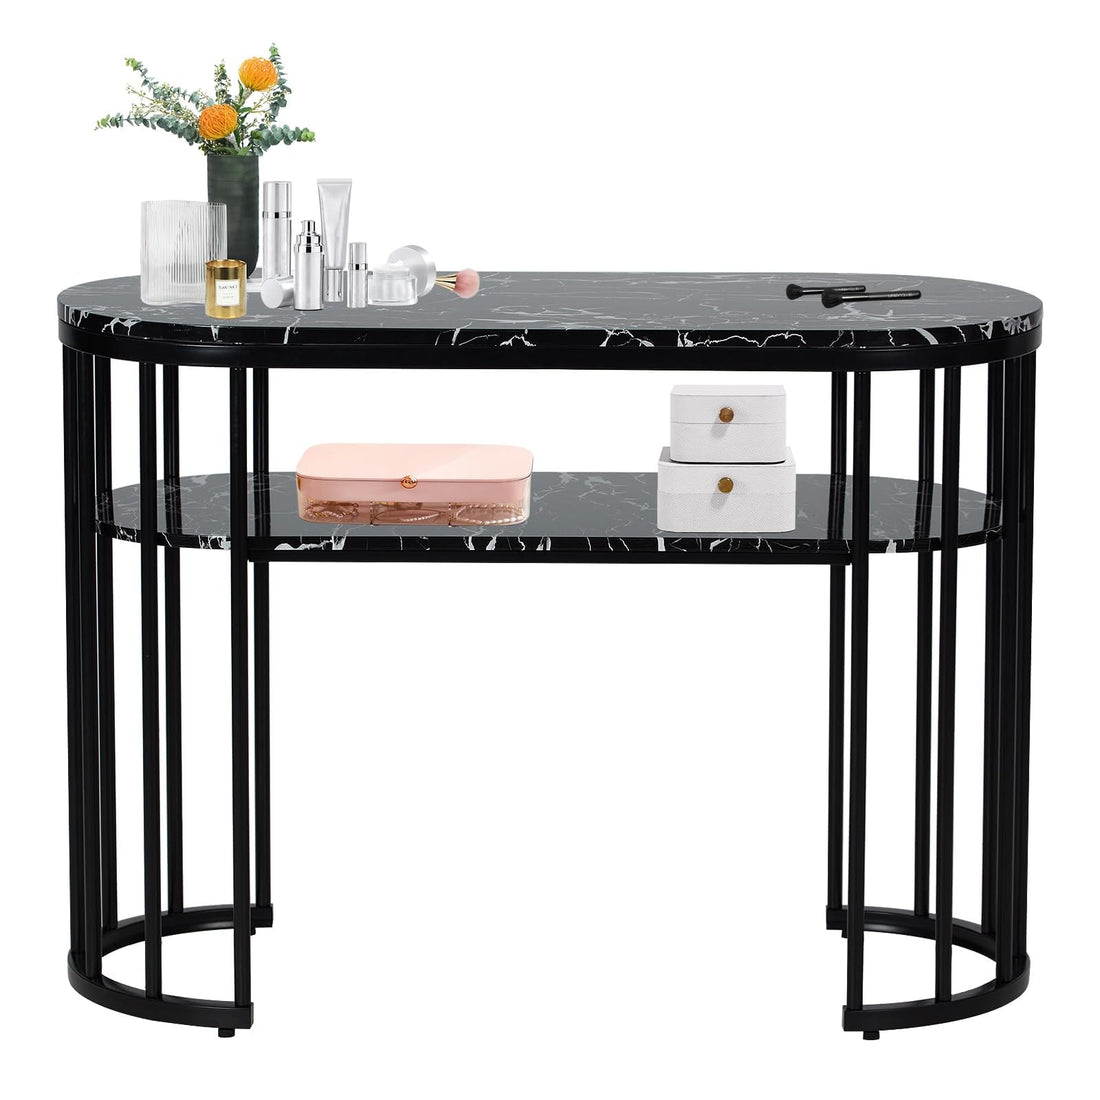 43"L Nail Equipment, Marbling Texture Manicure Table for Salon